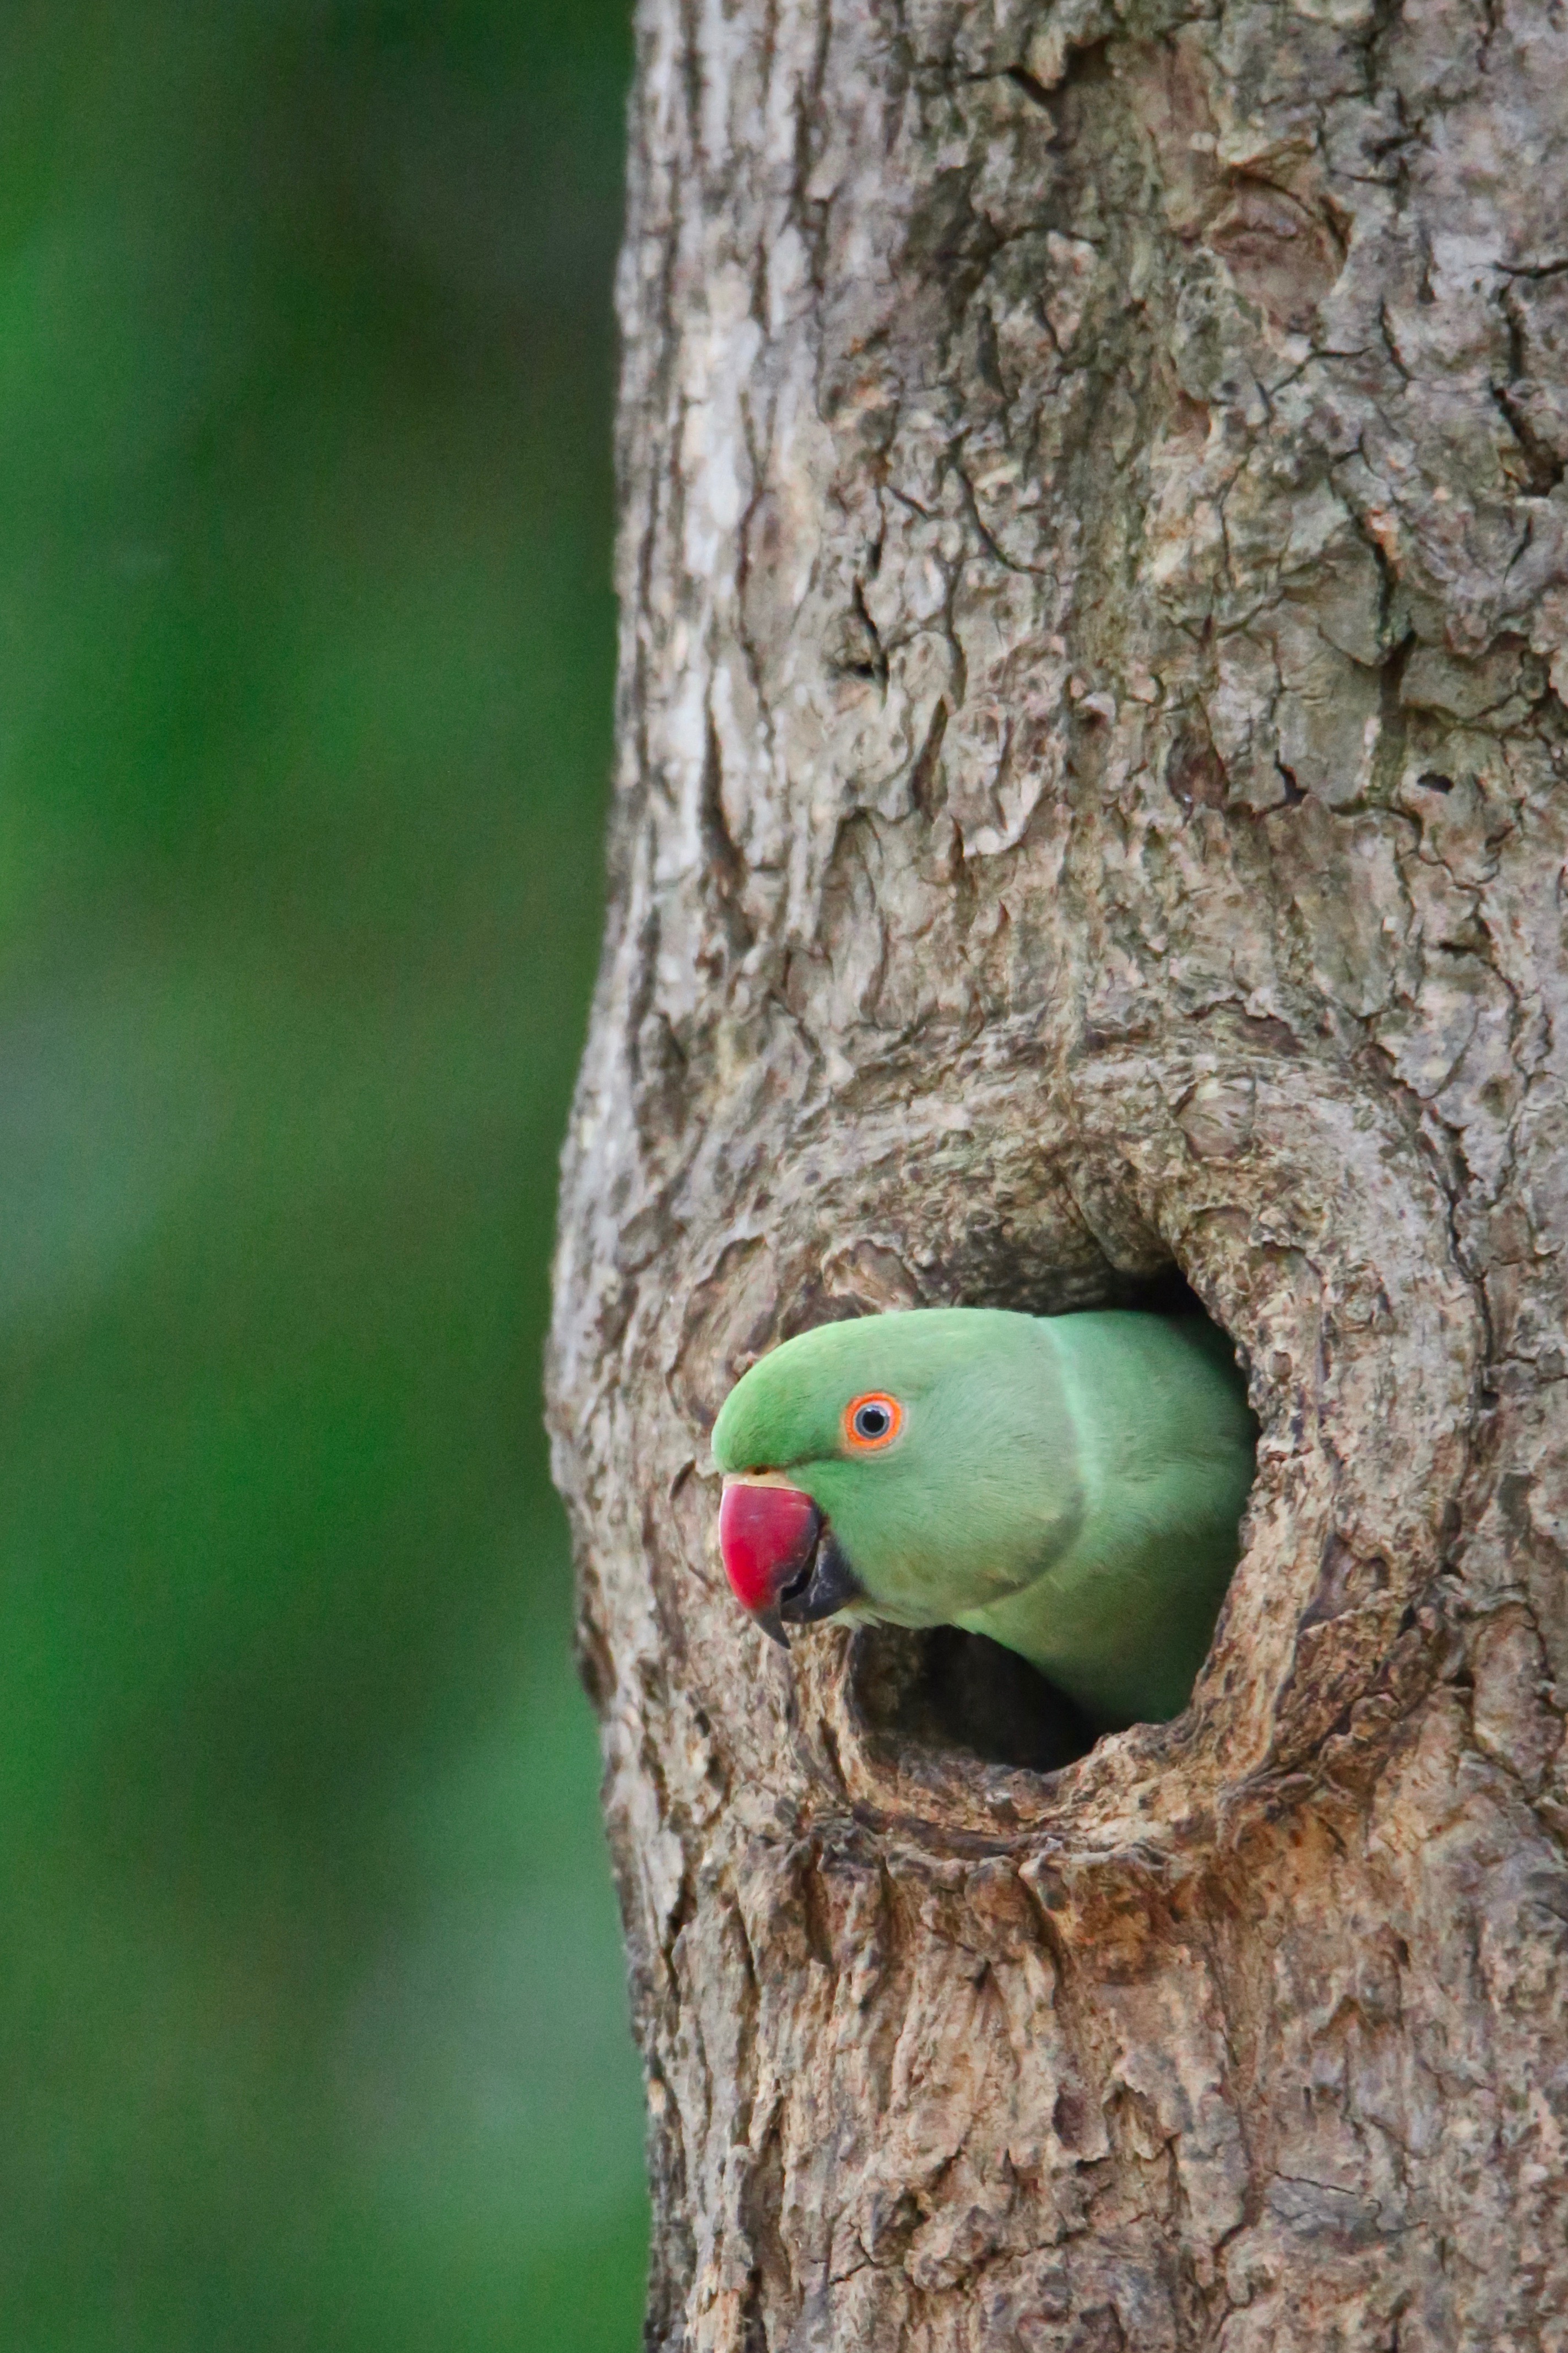 Rose-ringed parakeet in nest high resolution large images free